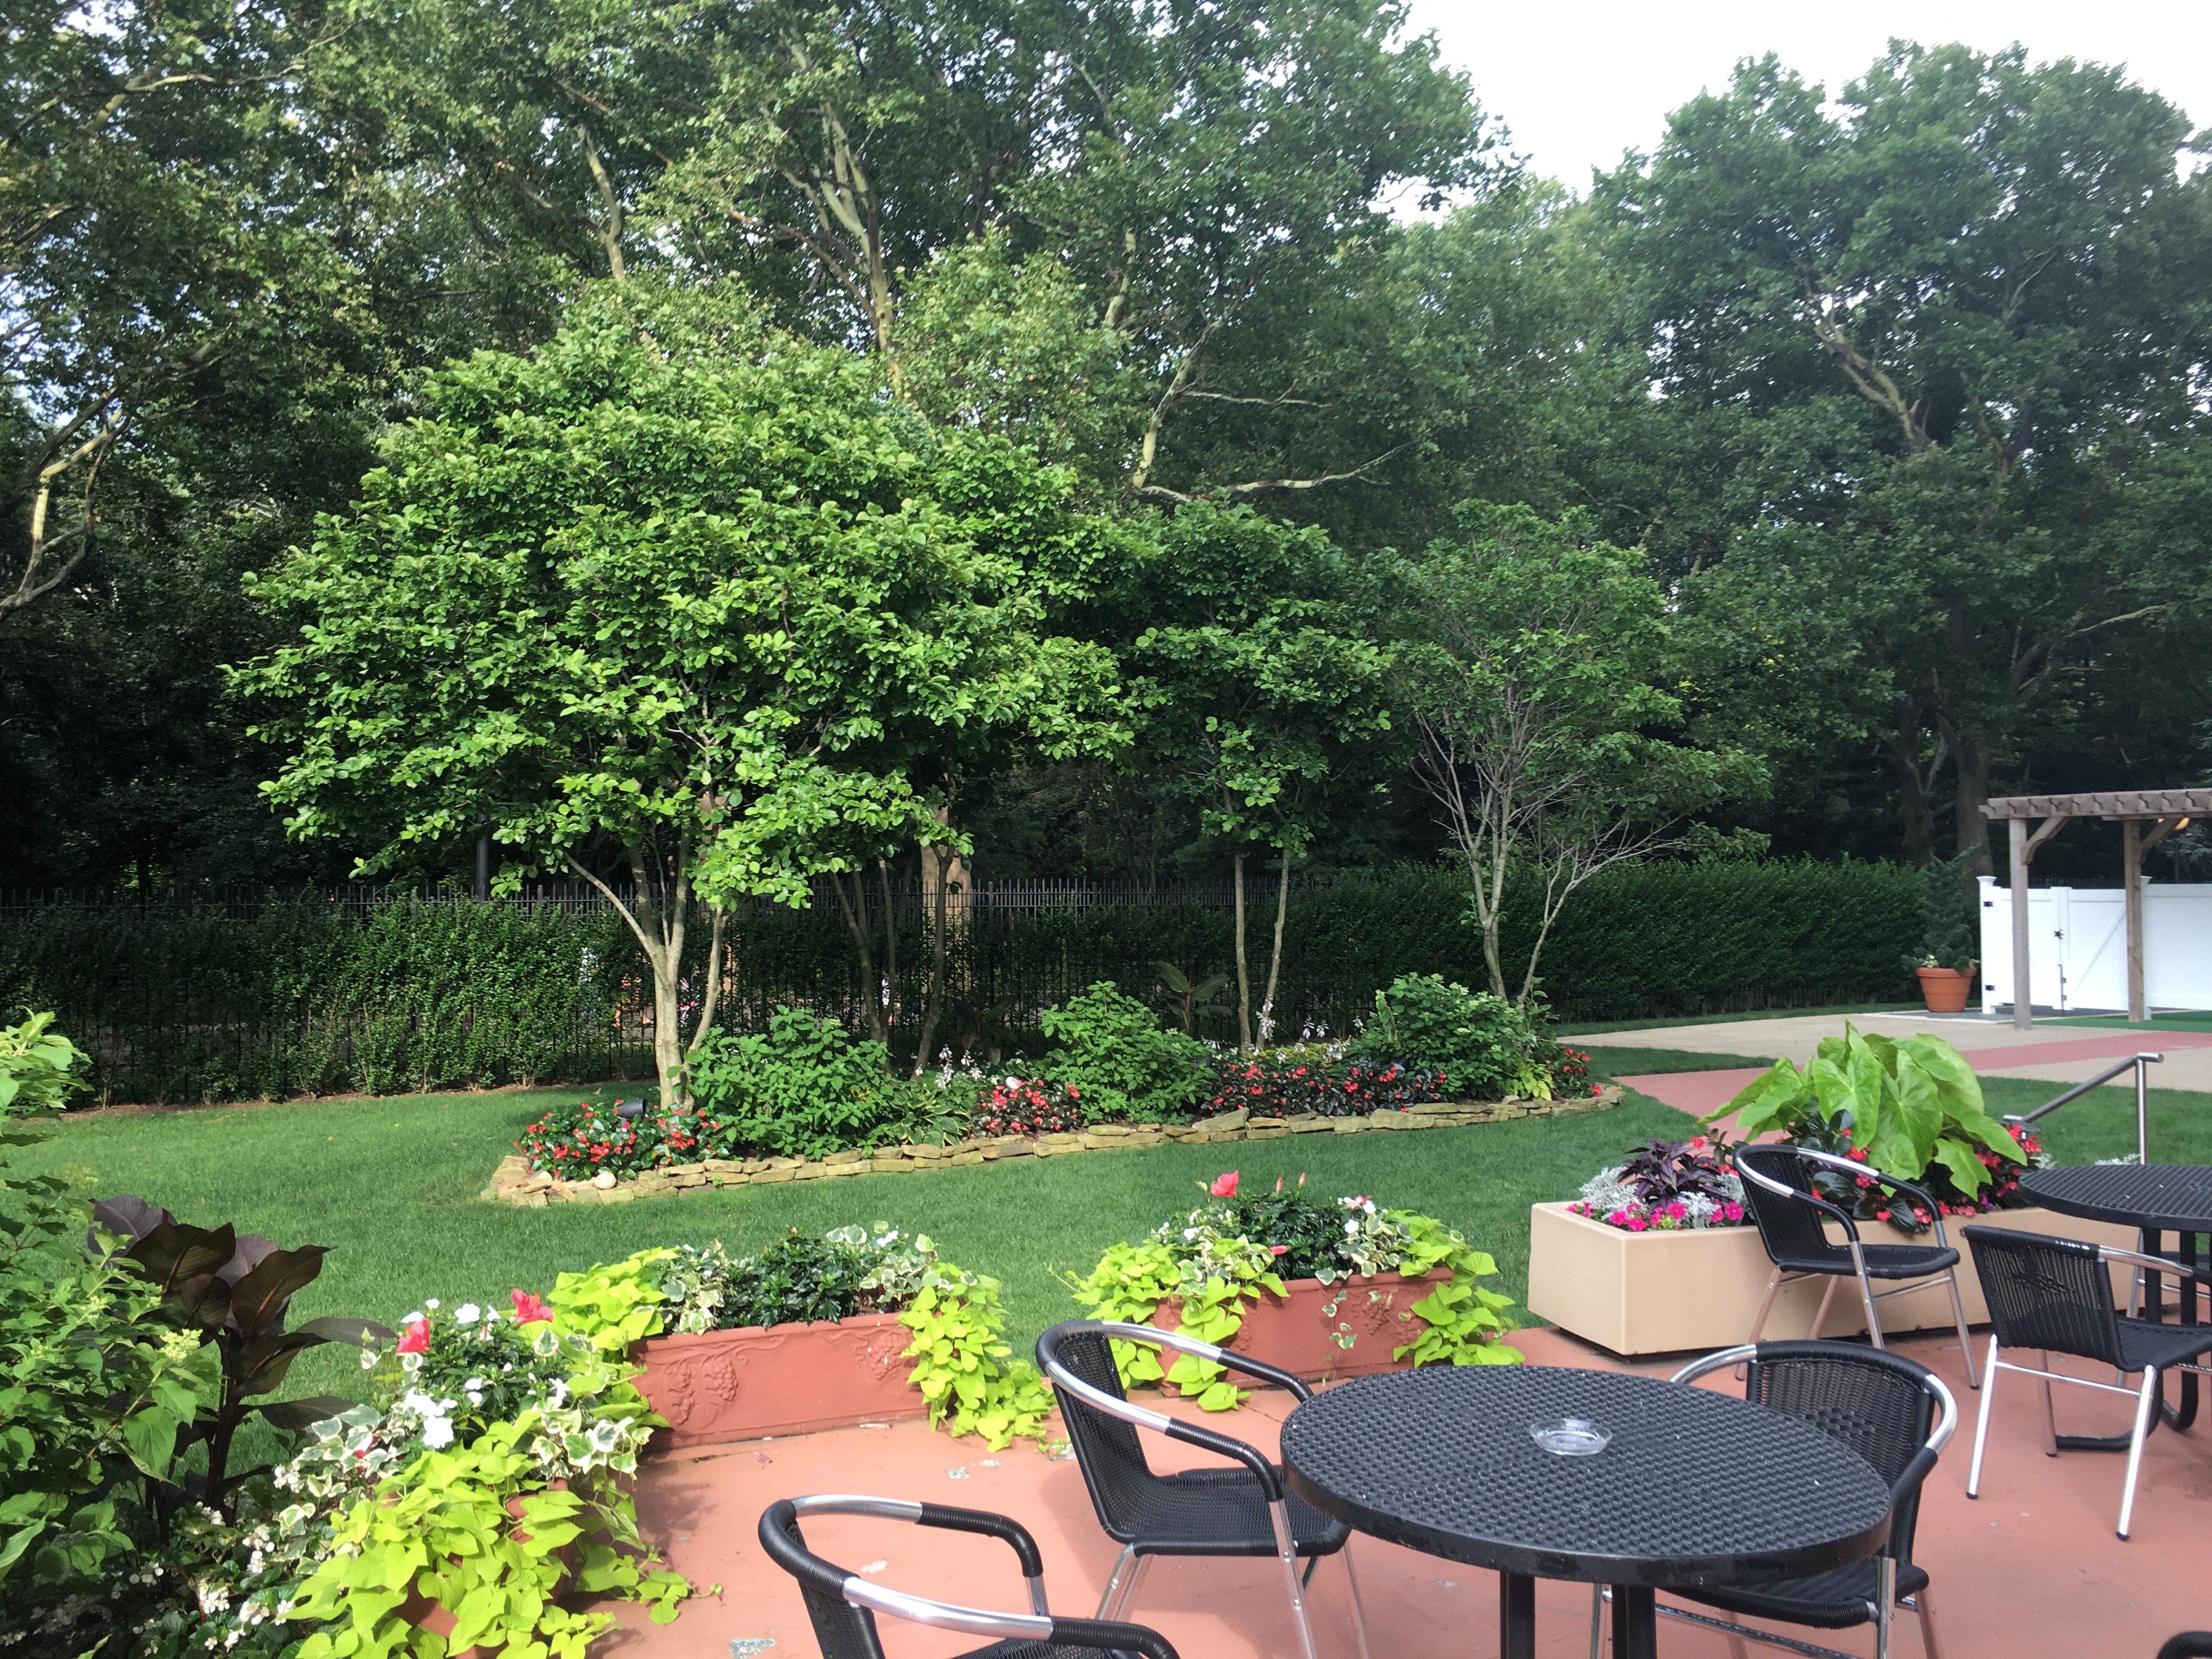 Our Gardens Terrace On The Park Queens (718)592-5000